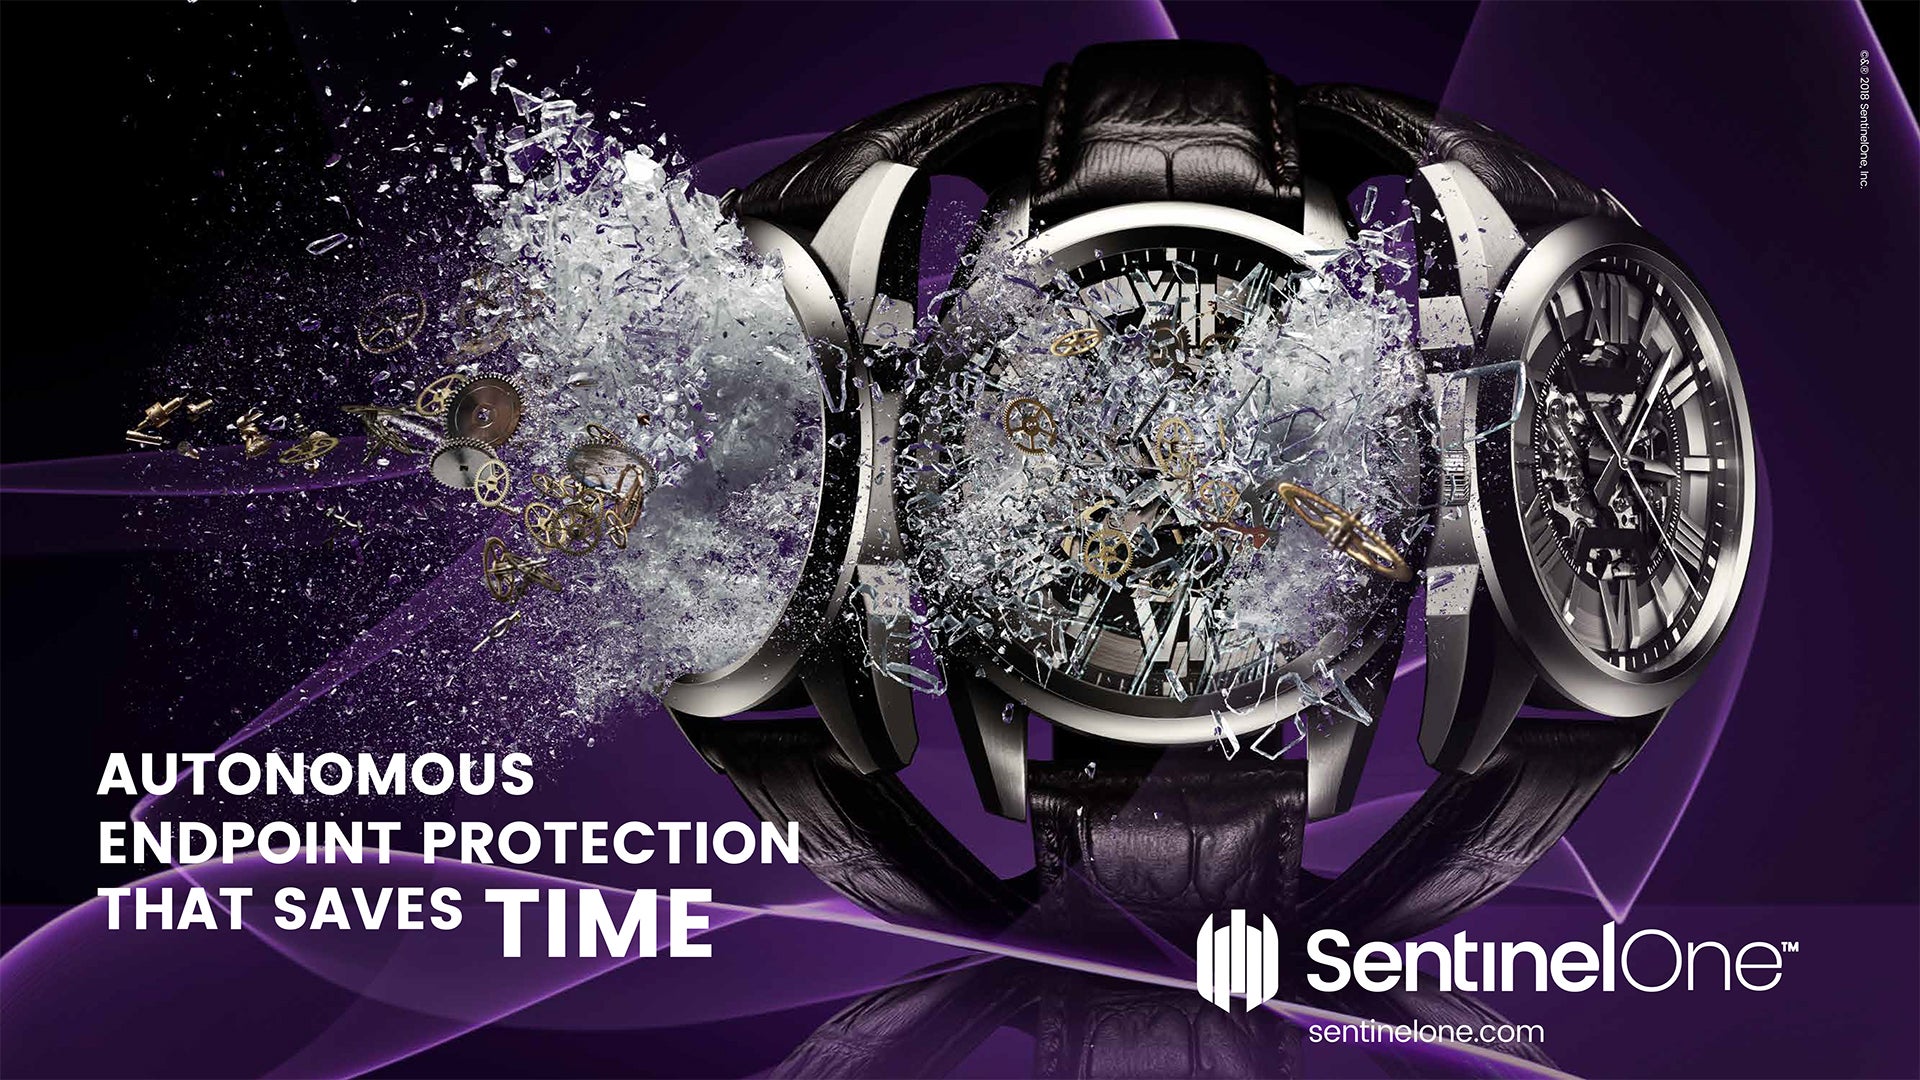 Sentinelone SentinelOne Extends Autonomous Endpoint Protection to All